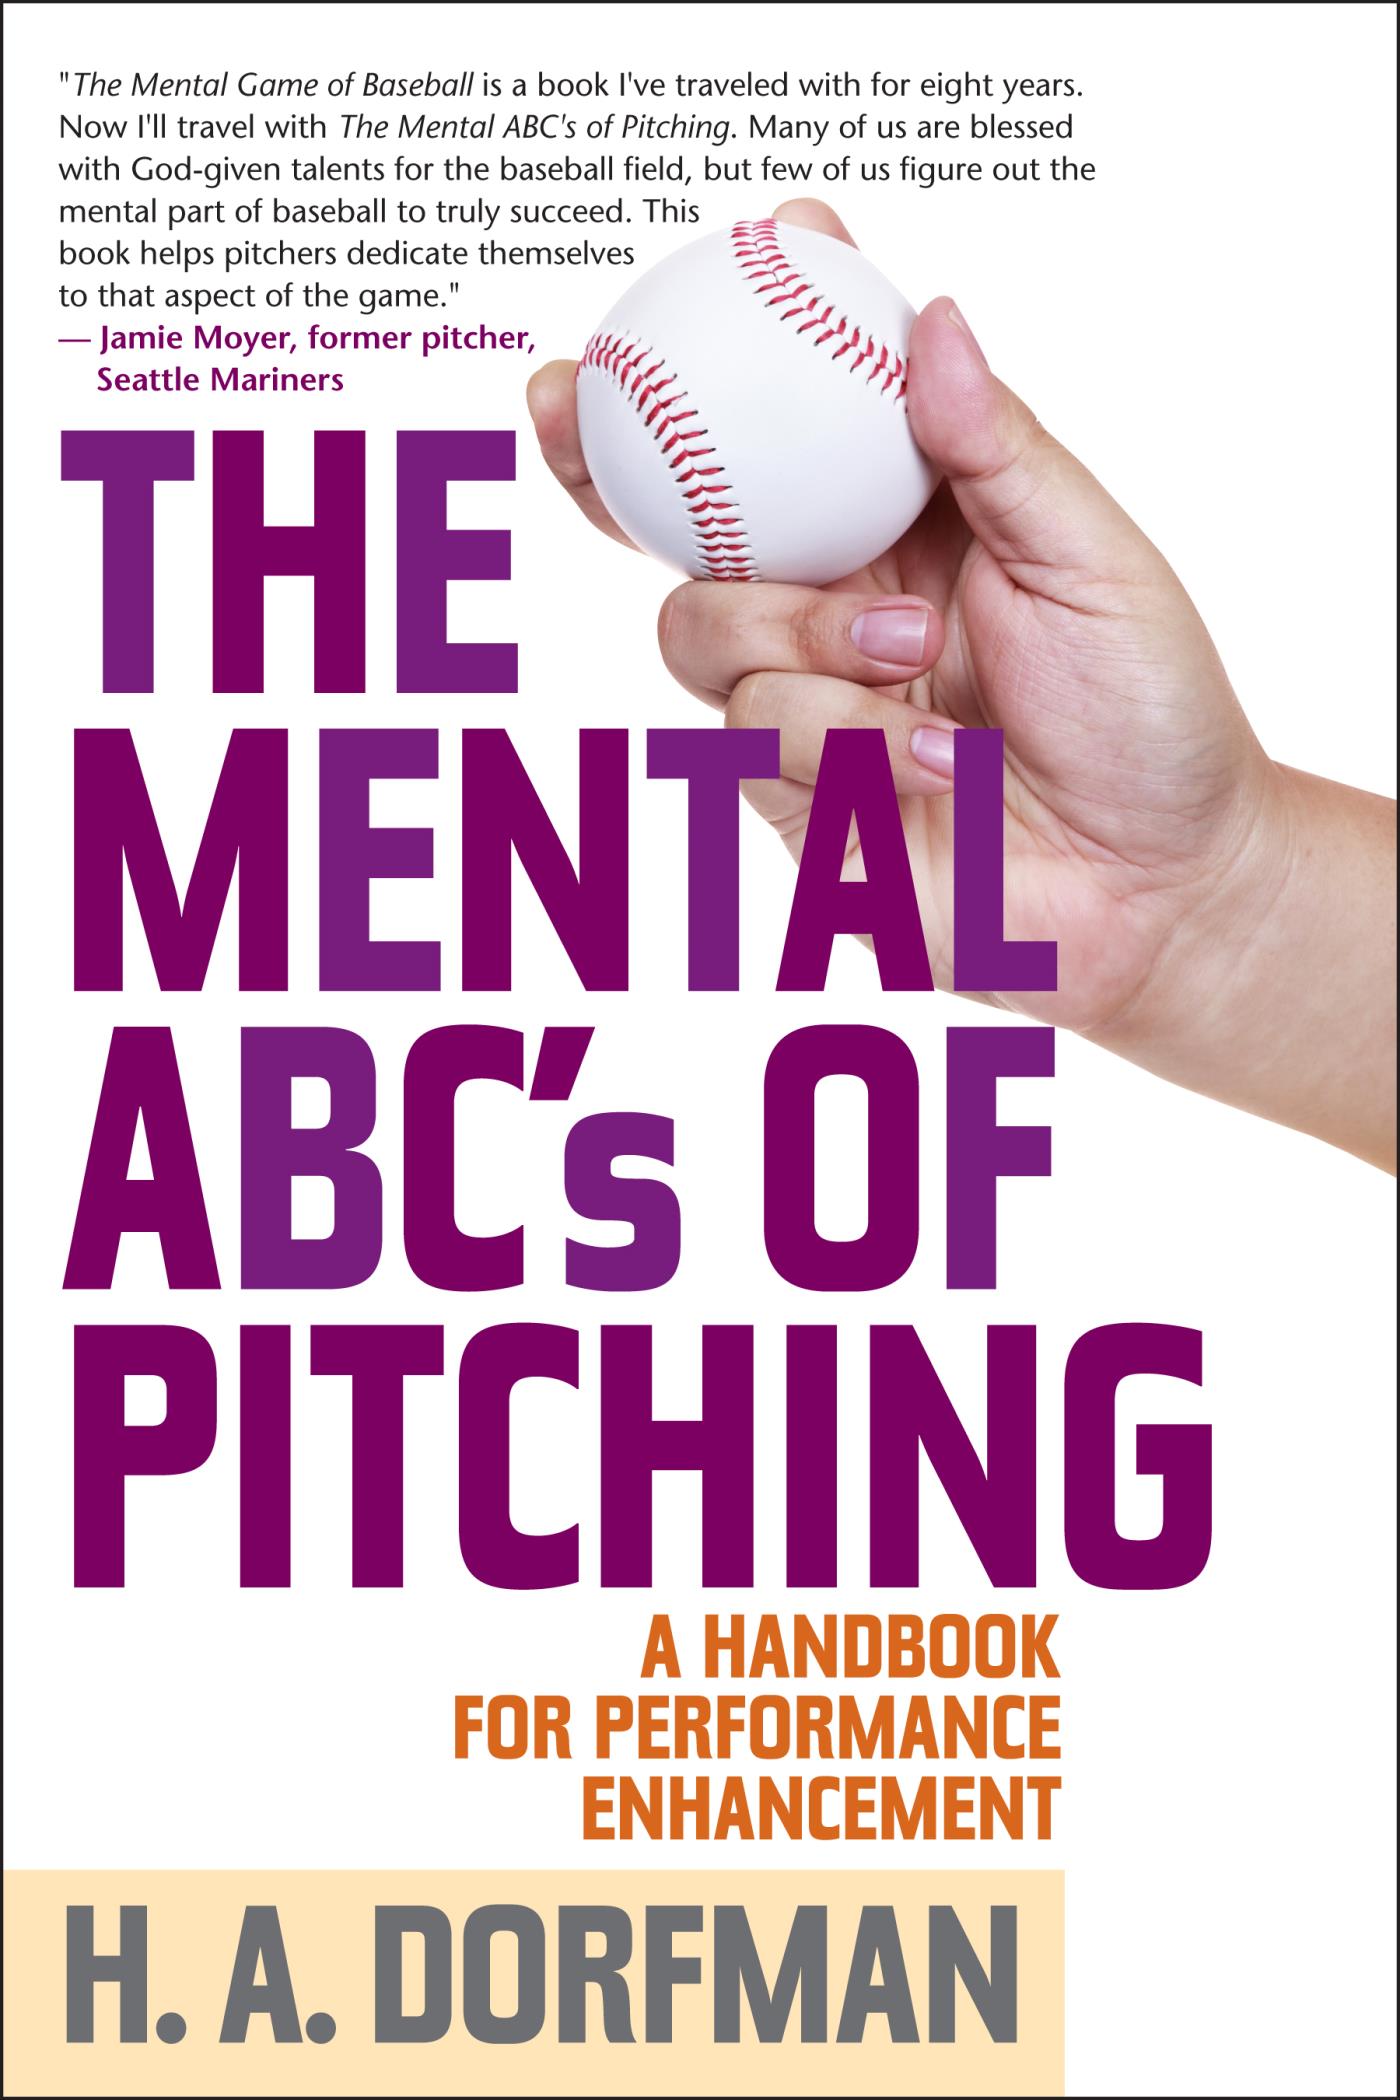 The Mental ABCs of Pitching